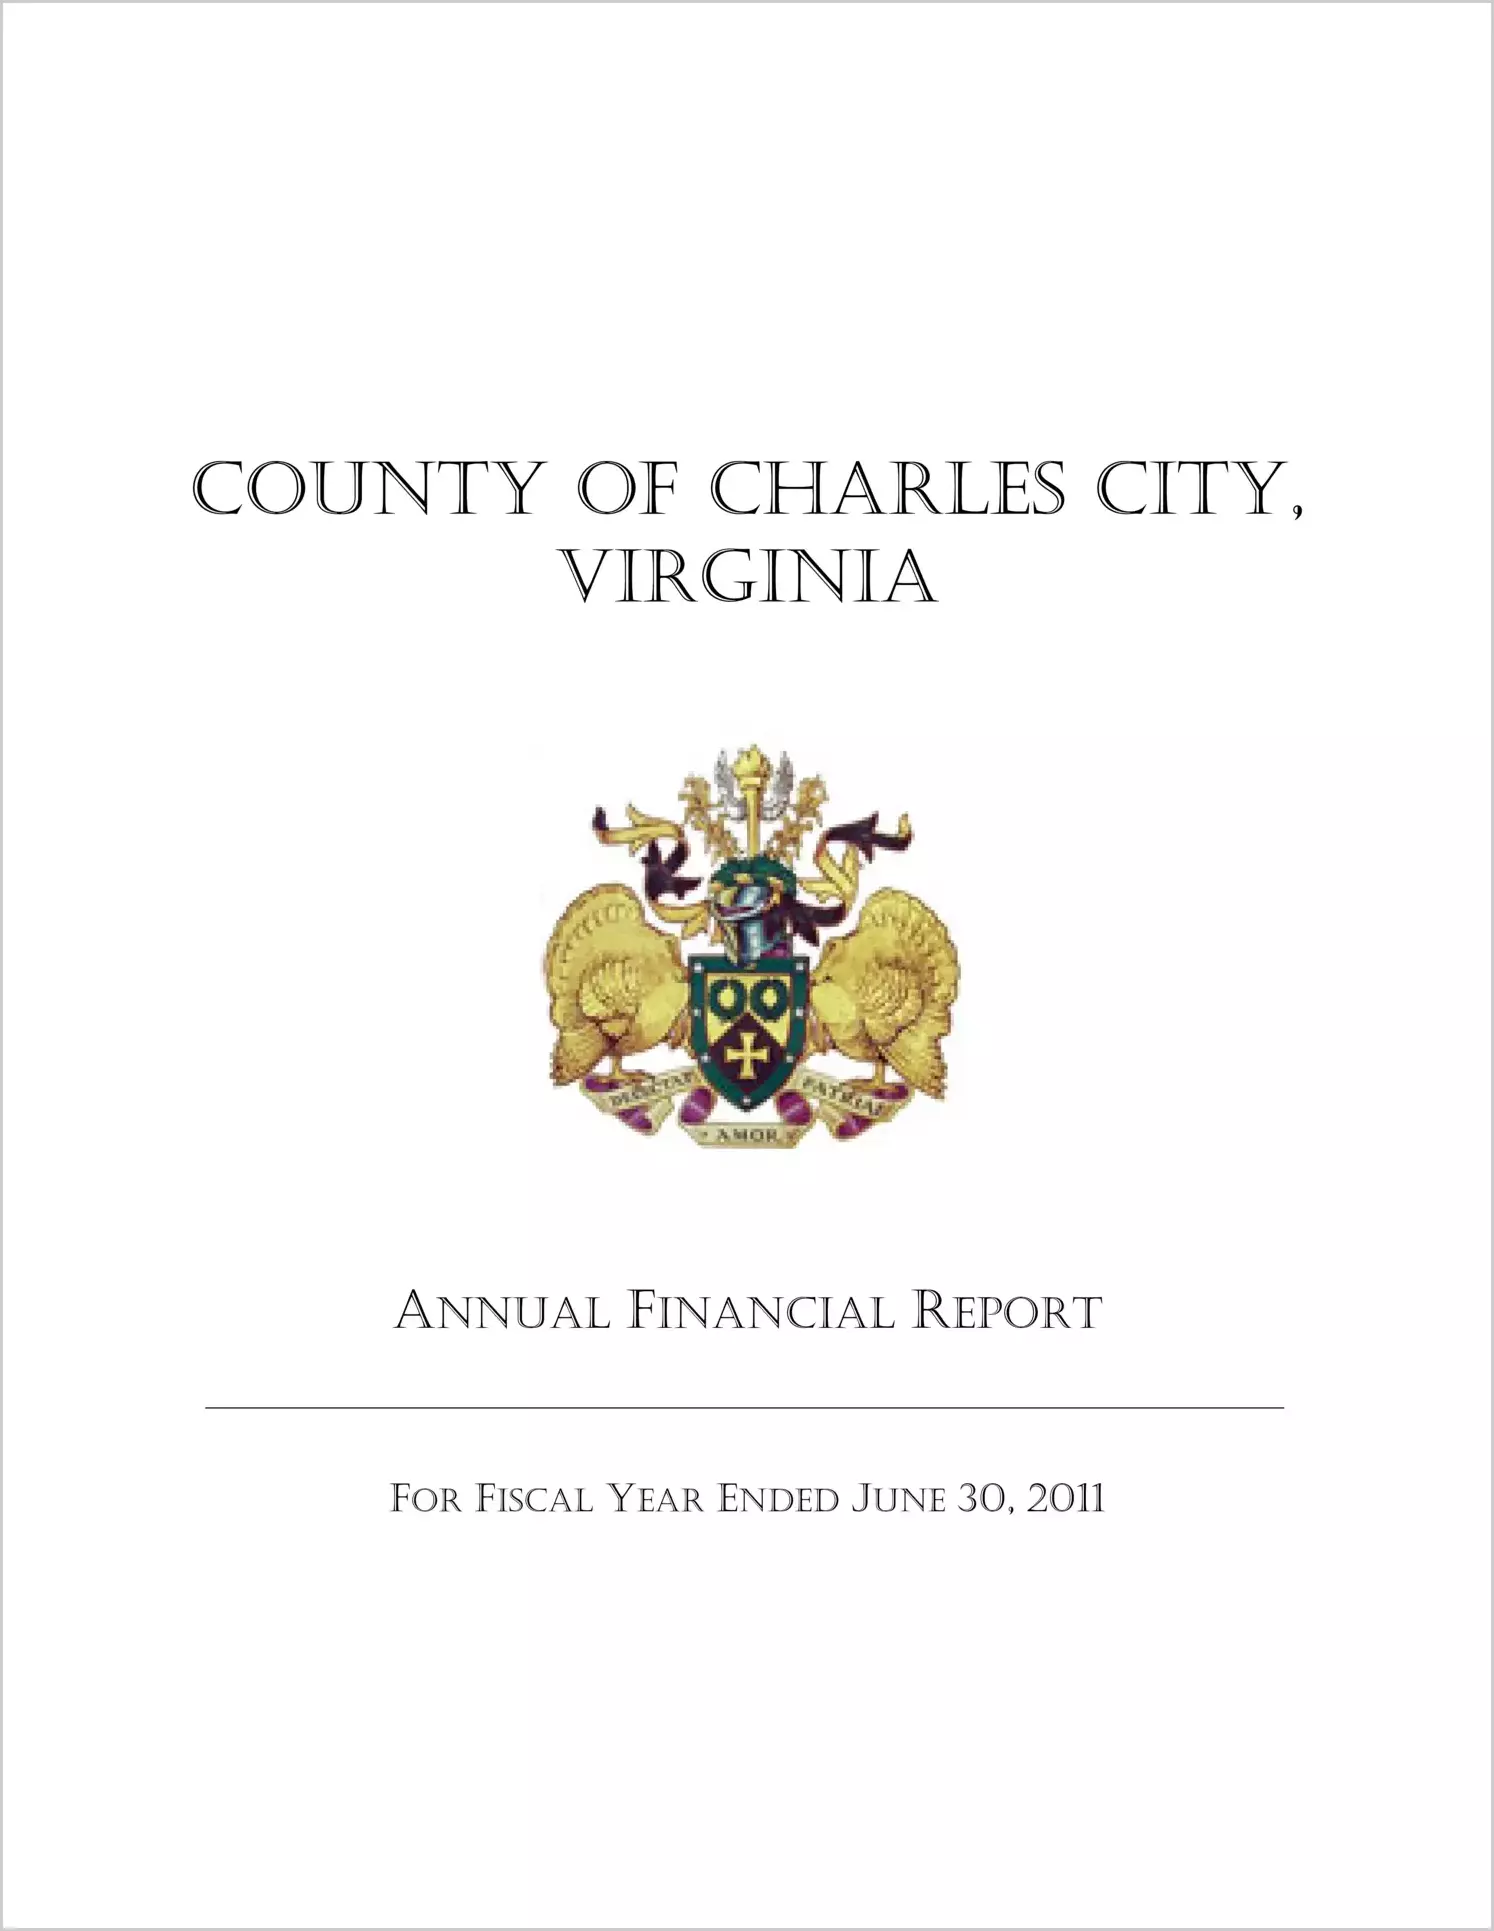 2011 Annual Financial Report for County of Charles City